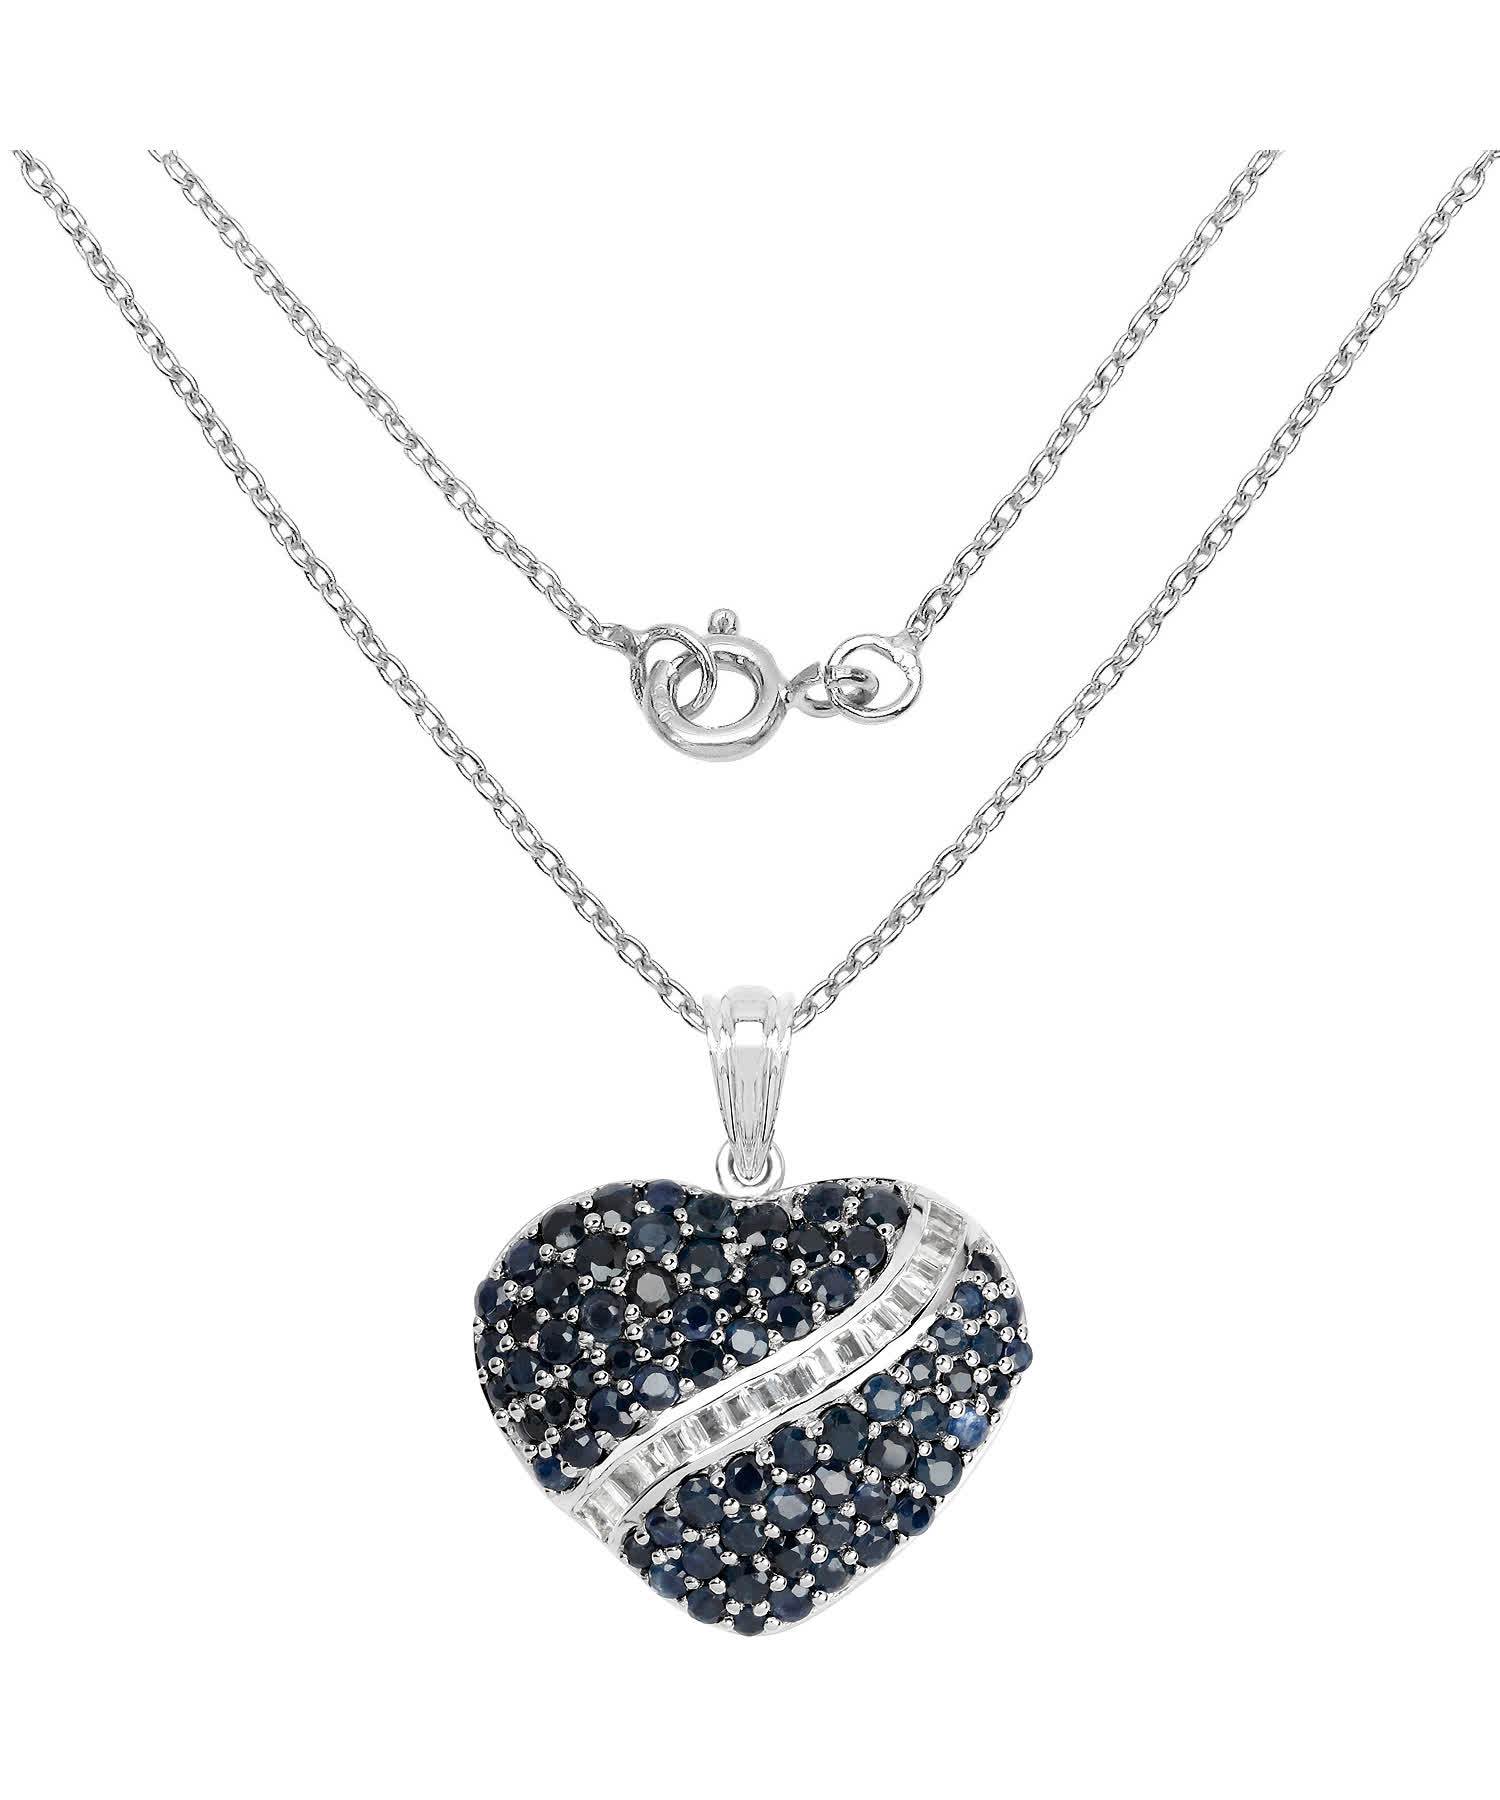 4.67ctw Natural Midnight Blue Sapphire and White Topaz Rhodium Plated 925 Sterling Silver Heart Pendant With Chain View 2